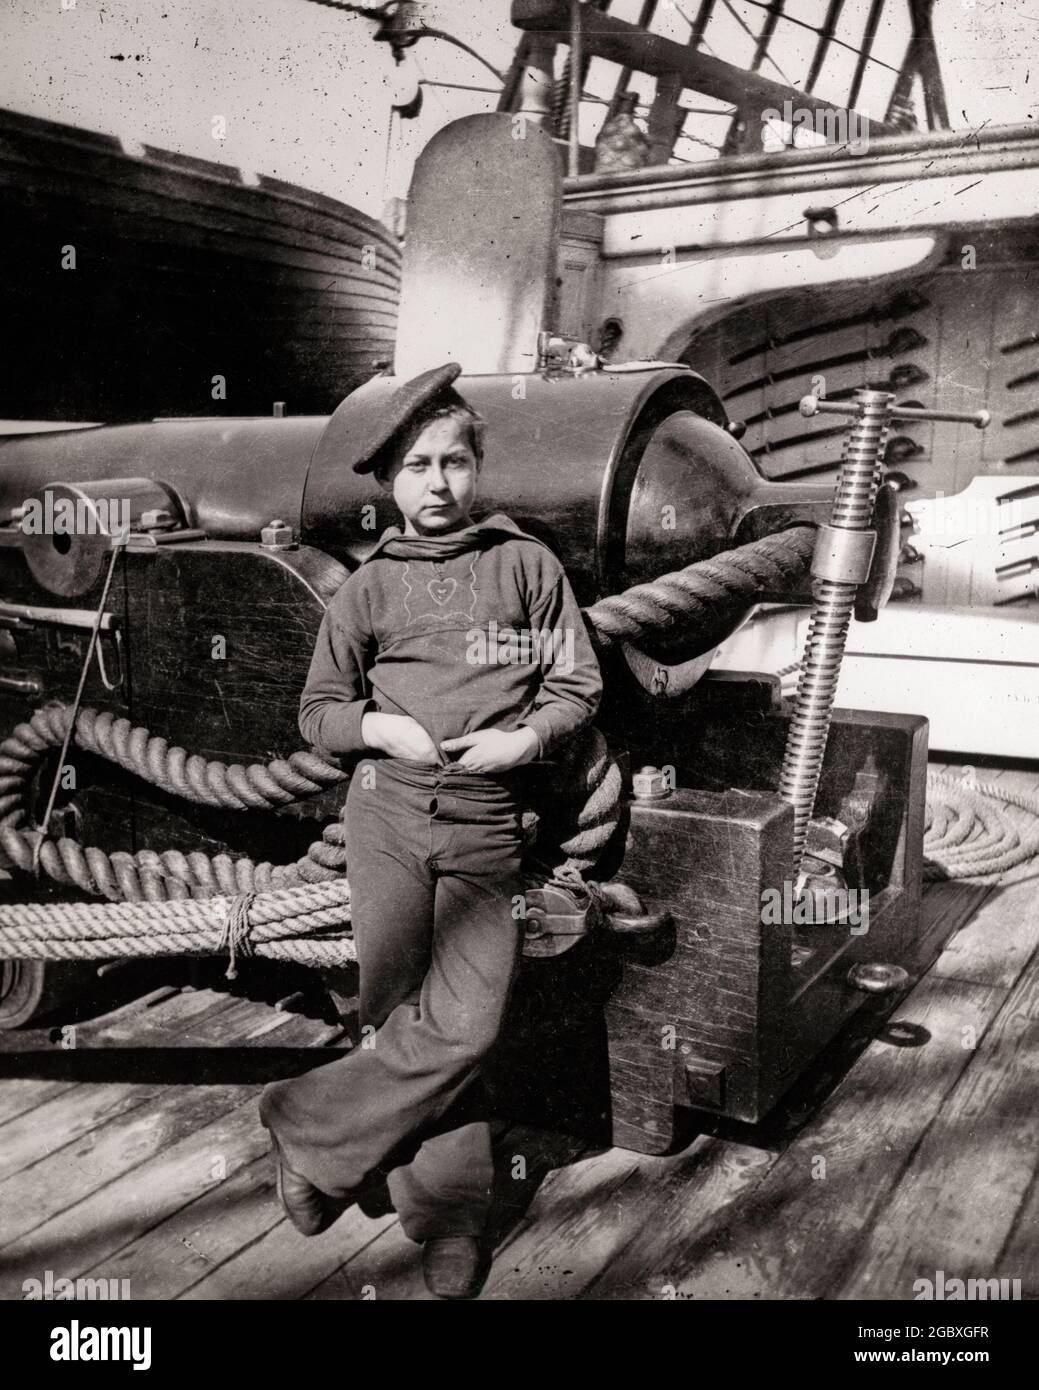 1800s 1860s BOY SAILOR POWDER MONKEY LOOKING AT CAMERA STANDING BY LARGE CANNON ON AMERICAN CIVIL WAR UNION GUNBOAT - h8912 SPL001 HARS B&W EYE CONTACT WARS ADVENTURE UNION NAVAL COURAGE PRIDE OPPORTUNITY OCCUPATIONS POWDER UNIFORMS FORCES 1860s NAVIES GUNBOAT USN GROWTH JUVENILES PRE-TEEN PRE-TEEN BOY AMERICAN CIVIL WAR BATTLES BLACK AND WHITE CAUCASIAN ETHNICITY CIVIL WAR CONFLICTS OLD FASHIONED Stock Photo